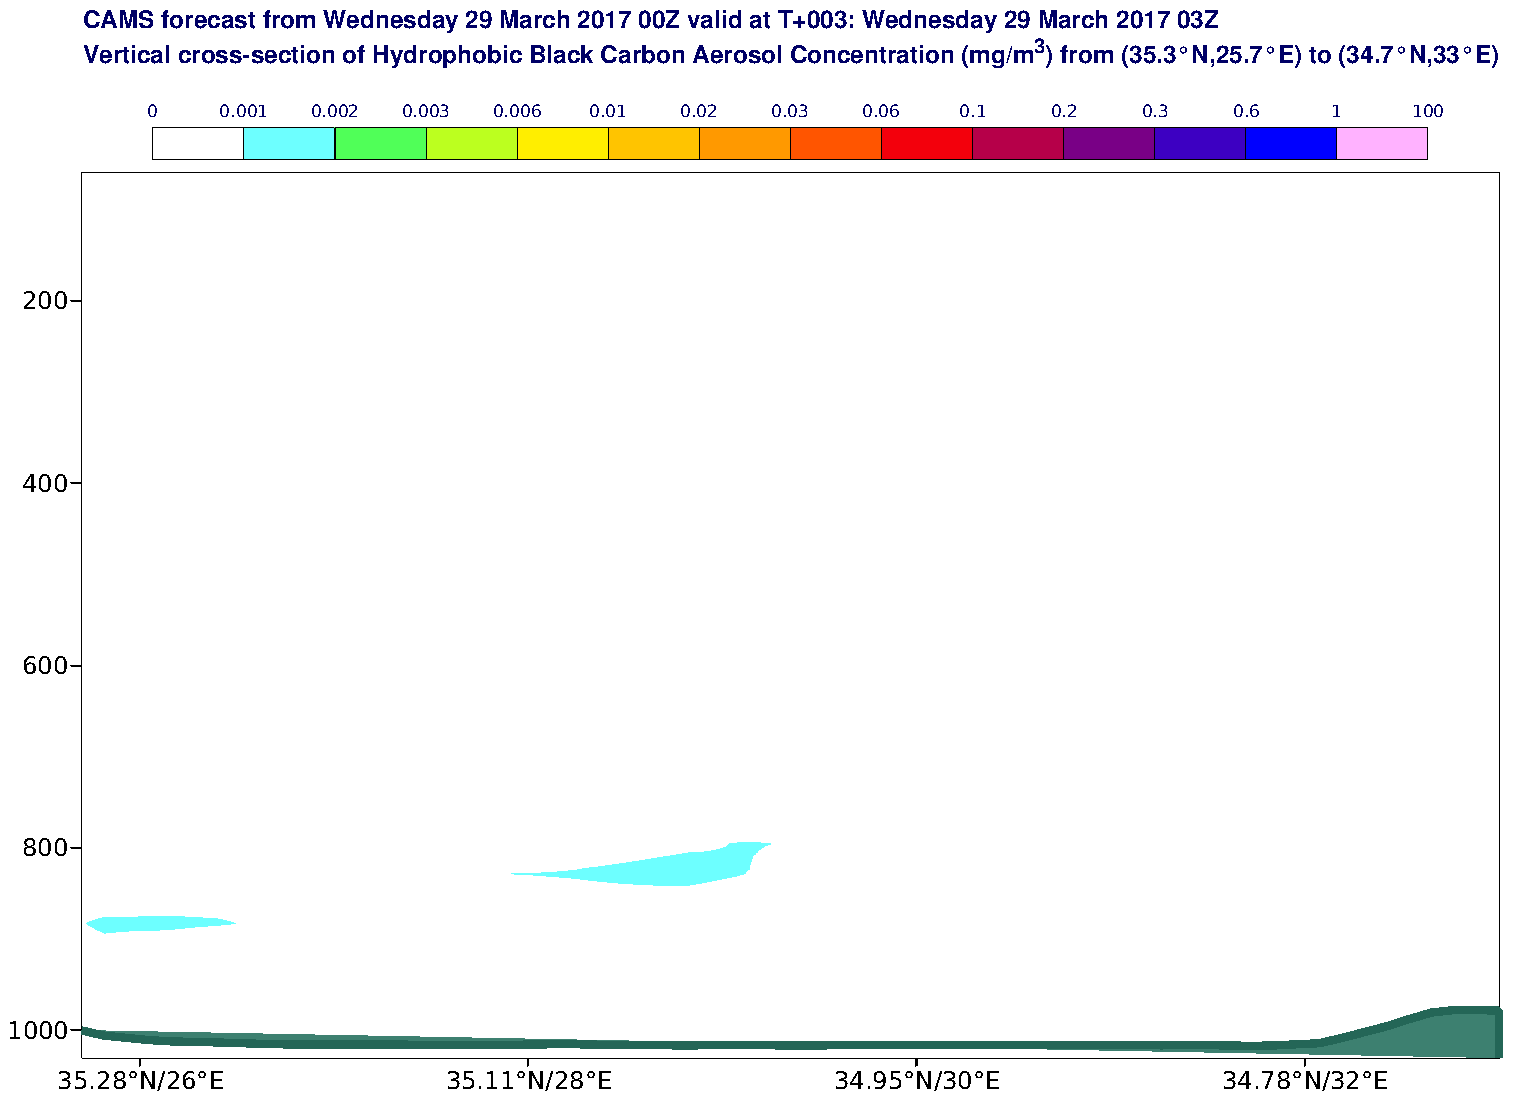 Vertical cross-section of Hydrophobic Black Carbon Aerosol Concentration (mg/m3) valid at T3 - 2017-03-29 03:00